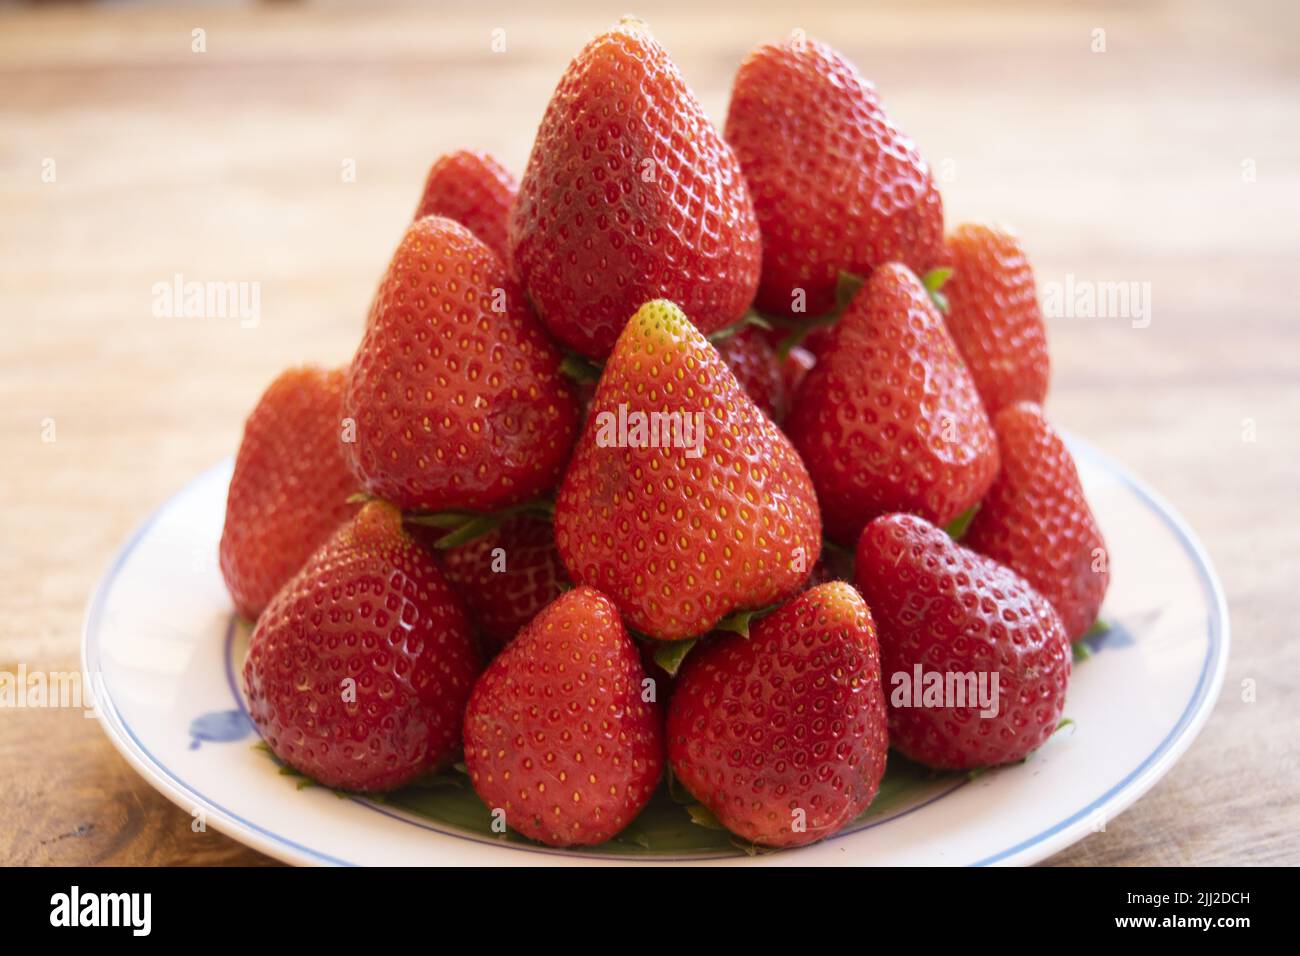 pile of fresh strawberries arranged in a pyramid Stock Photo